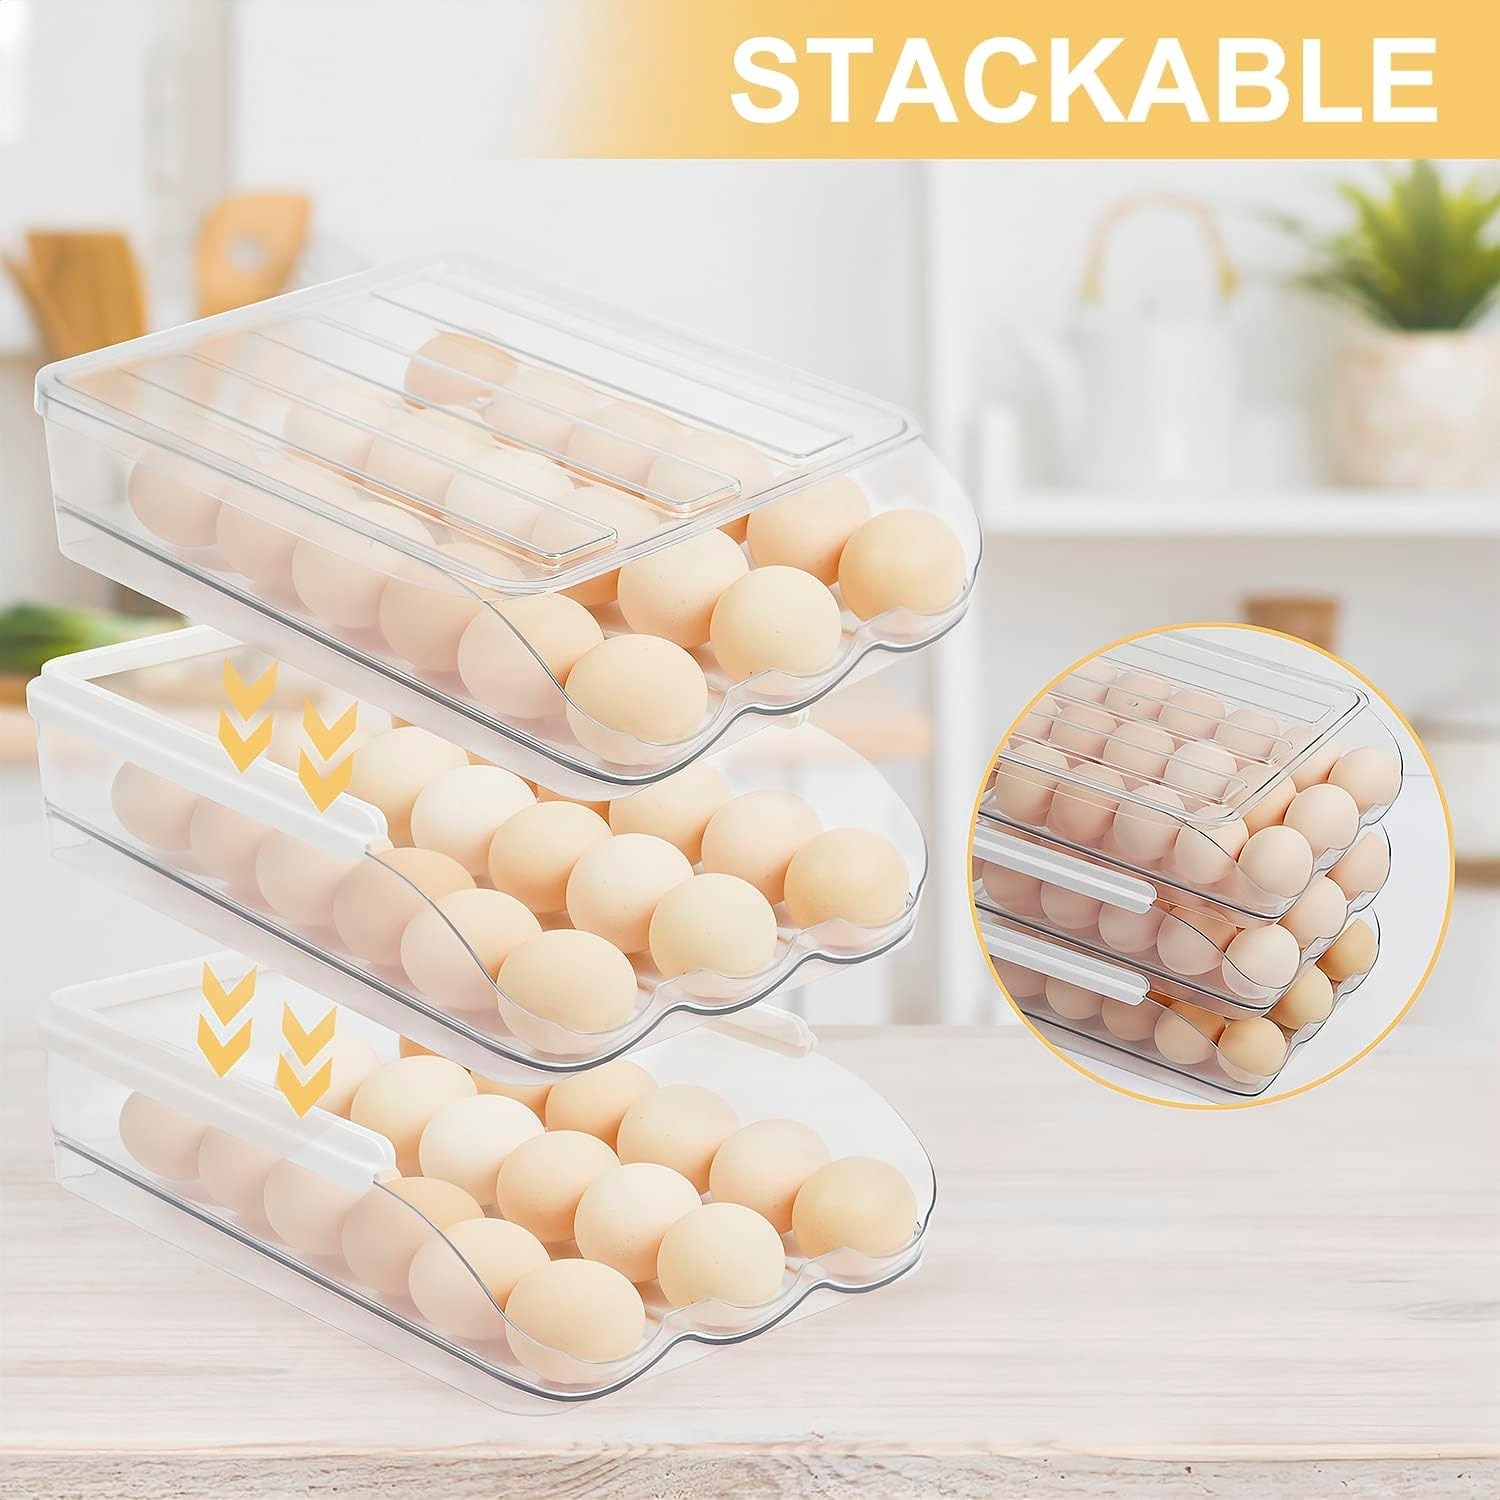 https://ak1.ostkcdn.com/images/products/is/images/direct/598d50920a44e528bb0a6354b8c79e0616b90001/Set-of-2-Auto-Rolling-Storage-Container-18-Egg-Tray.jpg